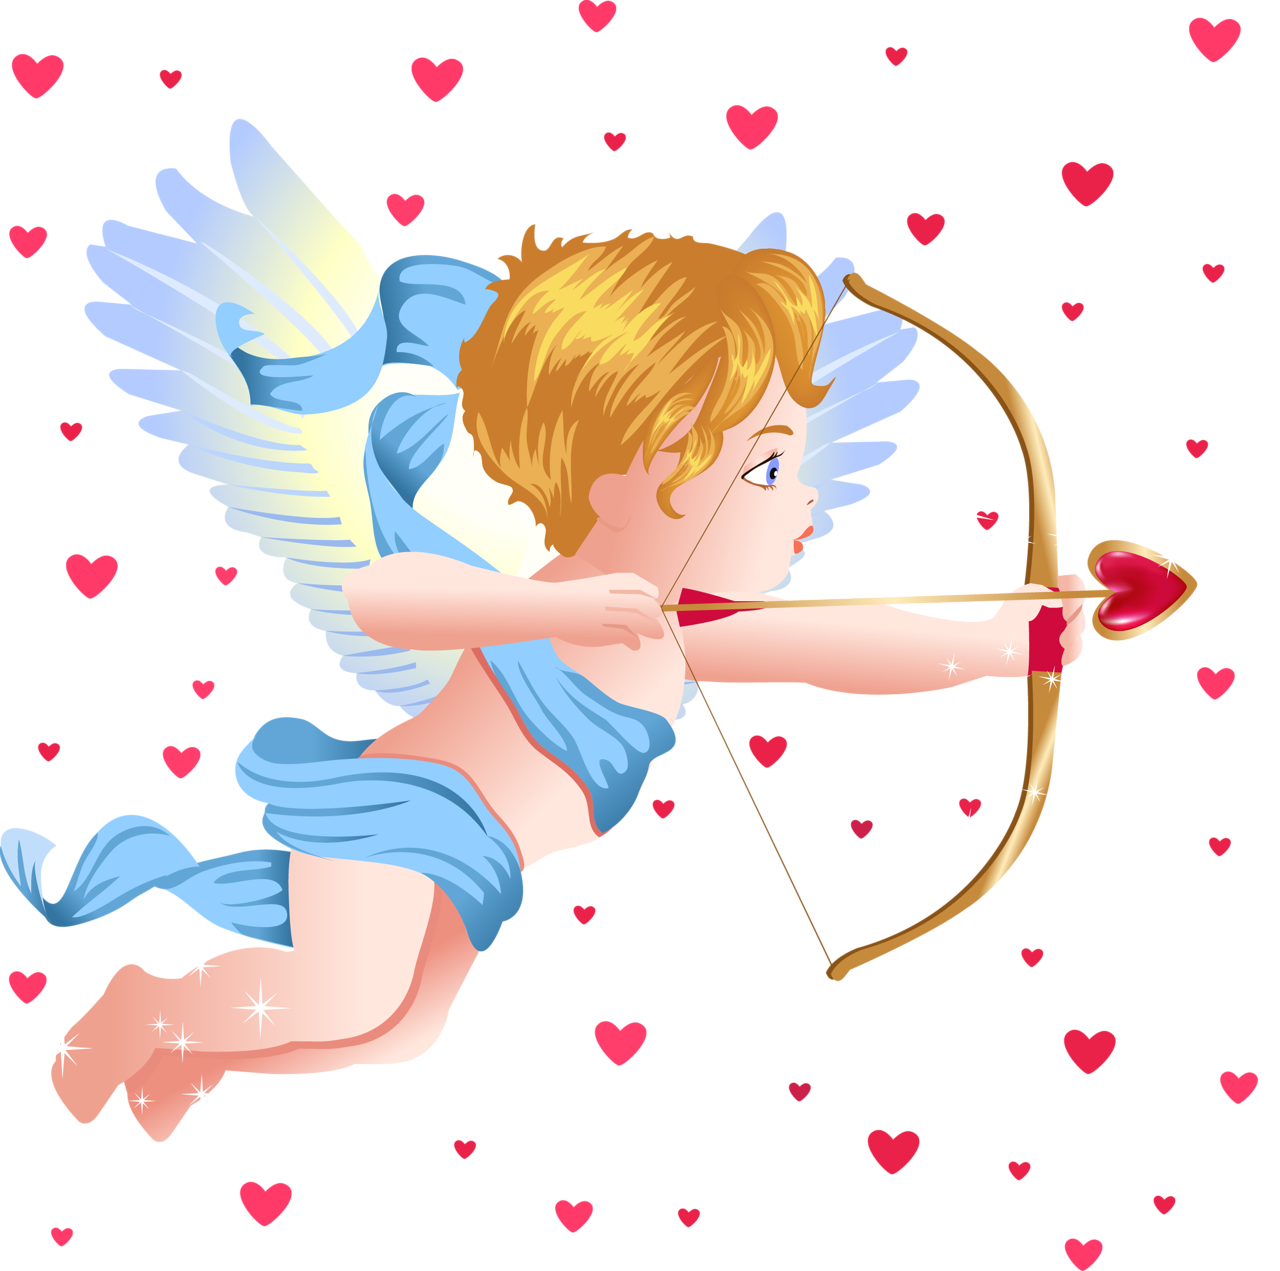 Http - //gallery - Yopriceville - Com/var/albums/free - Cupid Angels (1280x1271)